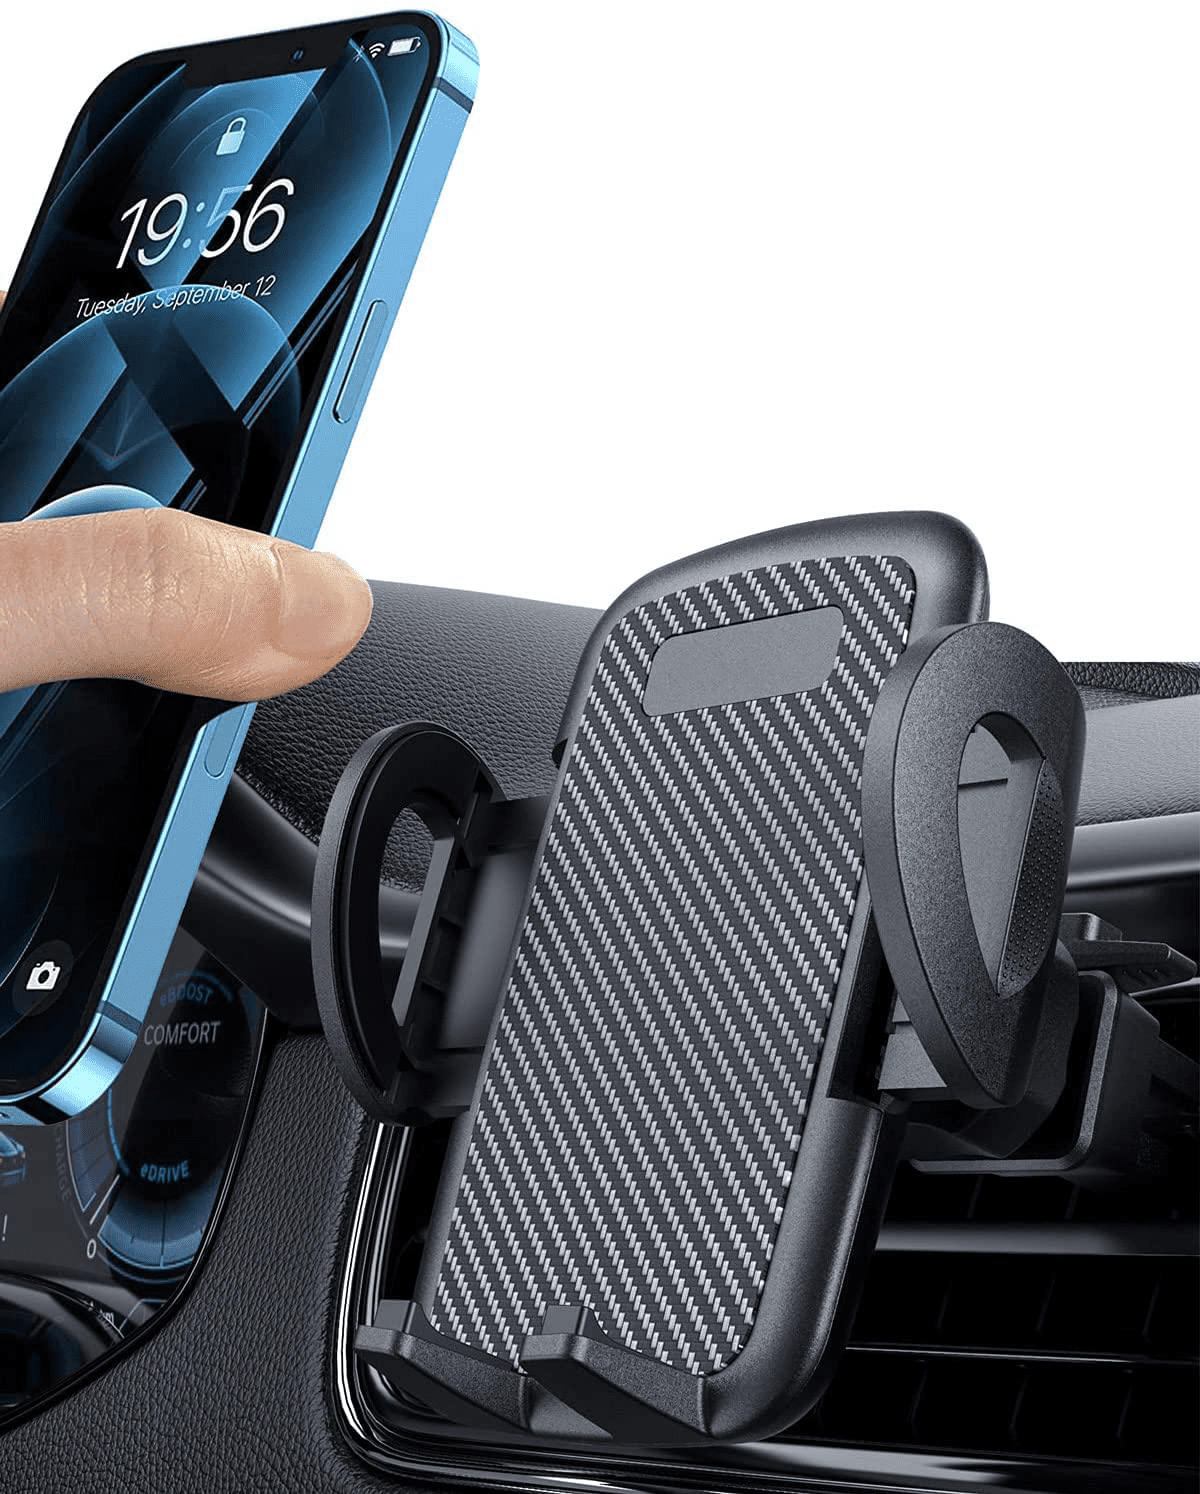 Areker Car Mobile Phone Car Holder Universal Air Vent Car Holder 360 Degree Rotation 2-level Adjustable Car Cradle Mount iPhone X 8 7 7 Plus 6s SE Samsung S8 Plus S7 HTC Huawei and More